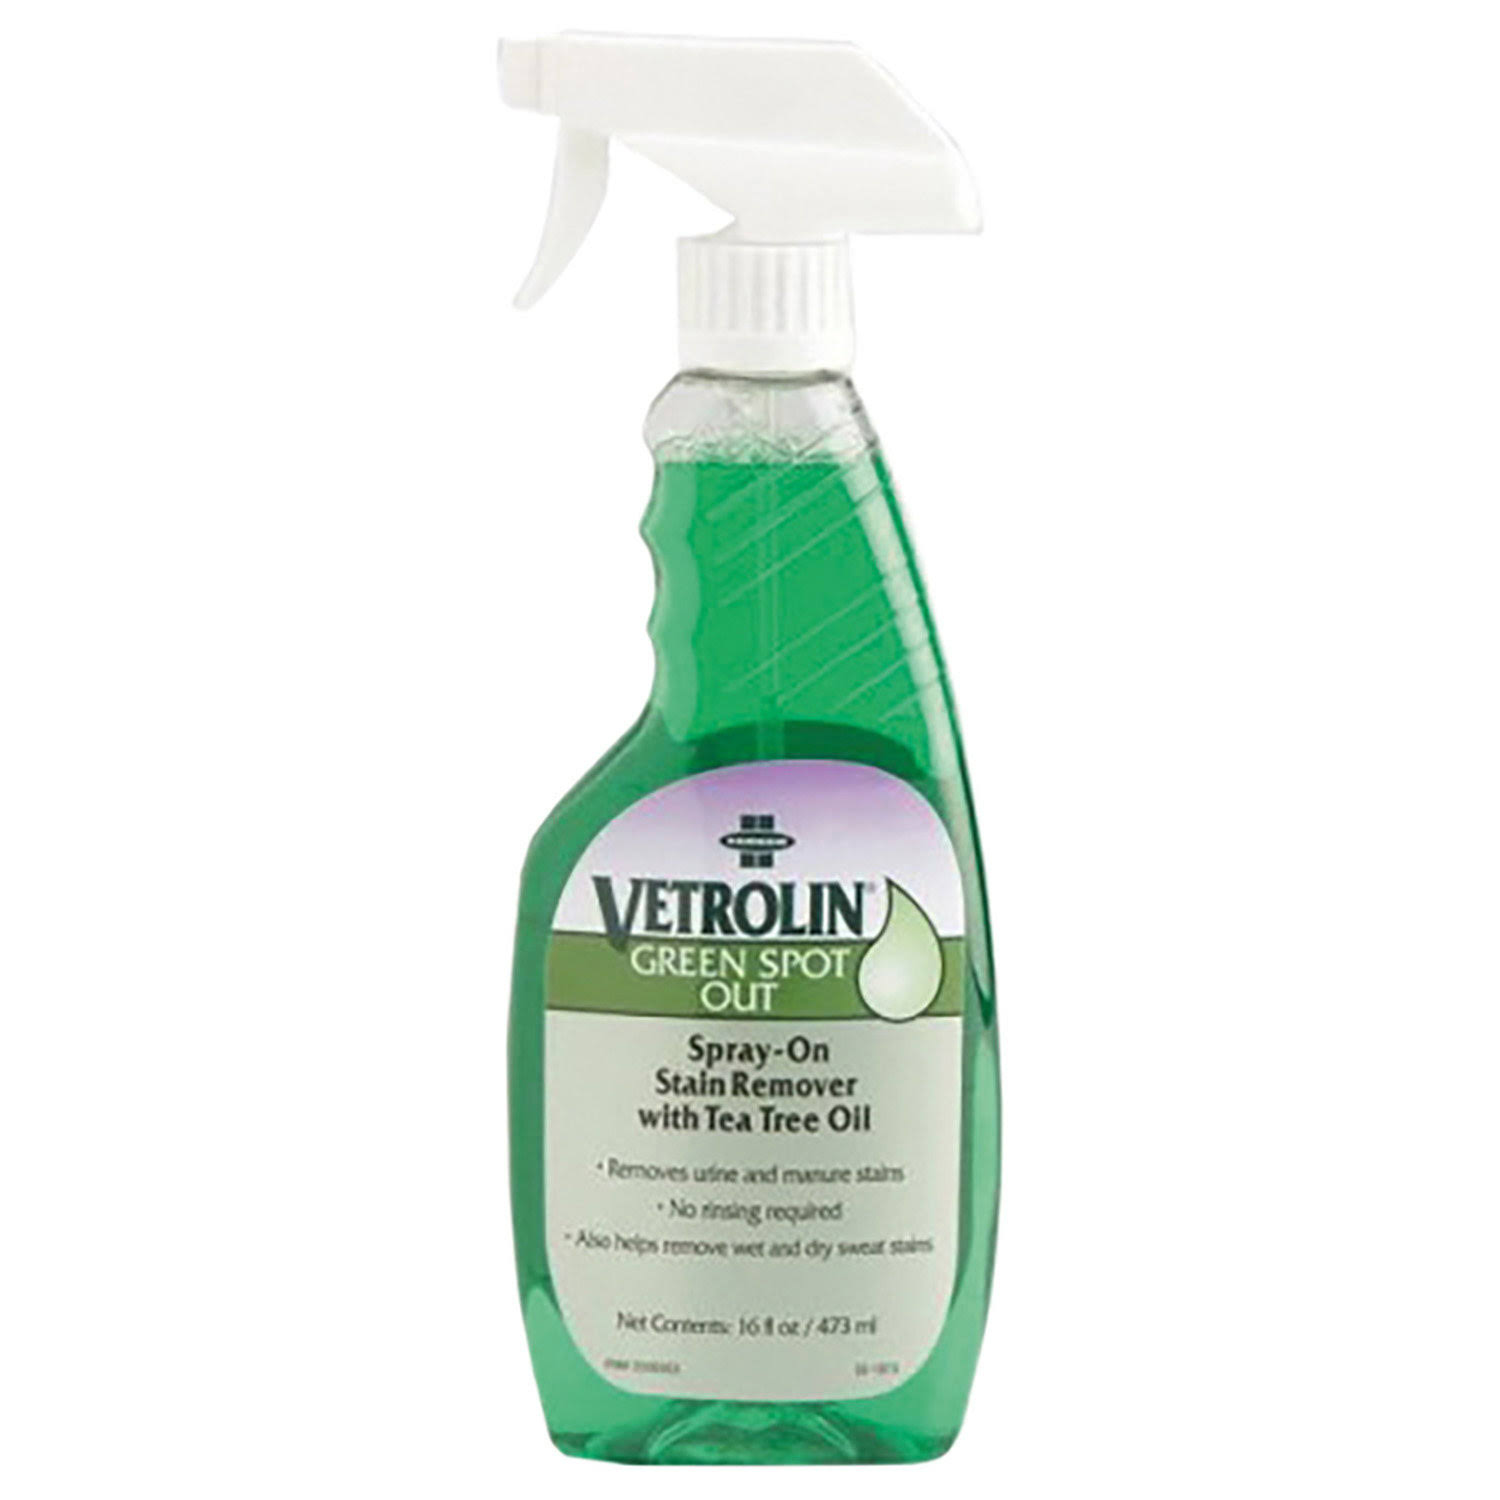 Farnam Companies 3004959 Vetrolin Green Spot Out Stain Remover Horse Grooming Shampoo